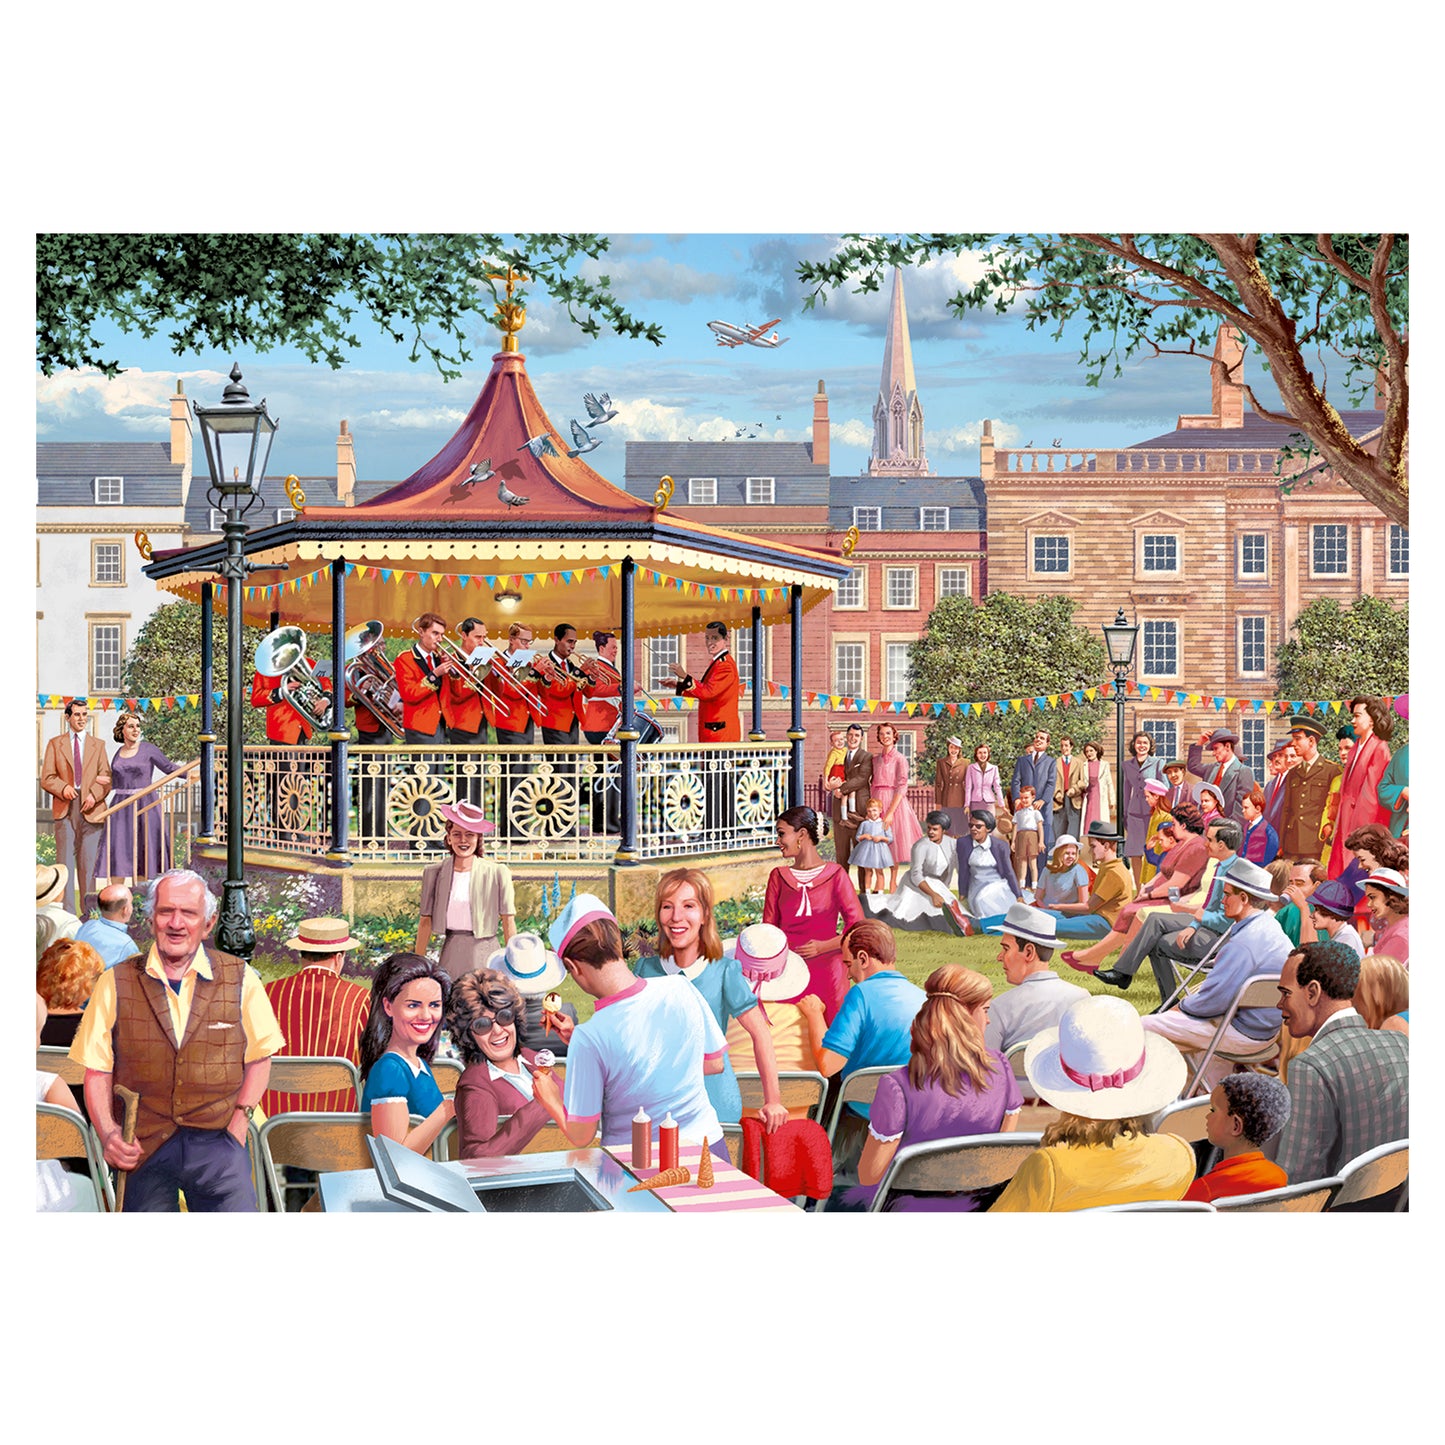 Falcon - The Bandstand (1000 pieces) - product image - Jumboplay.com